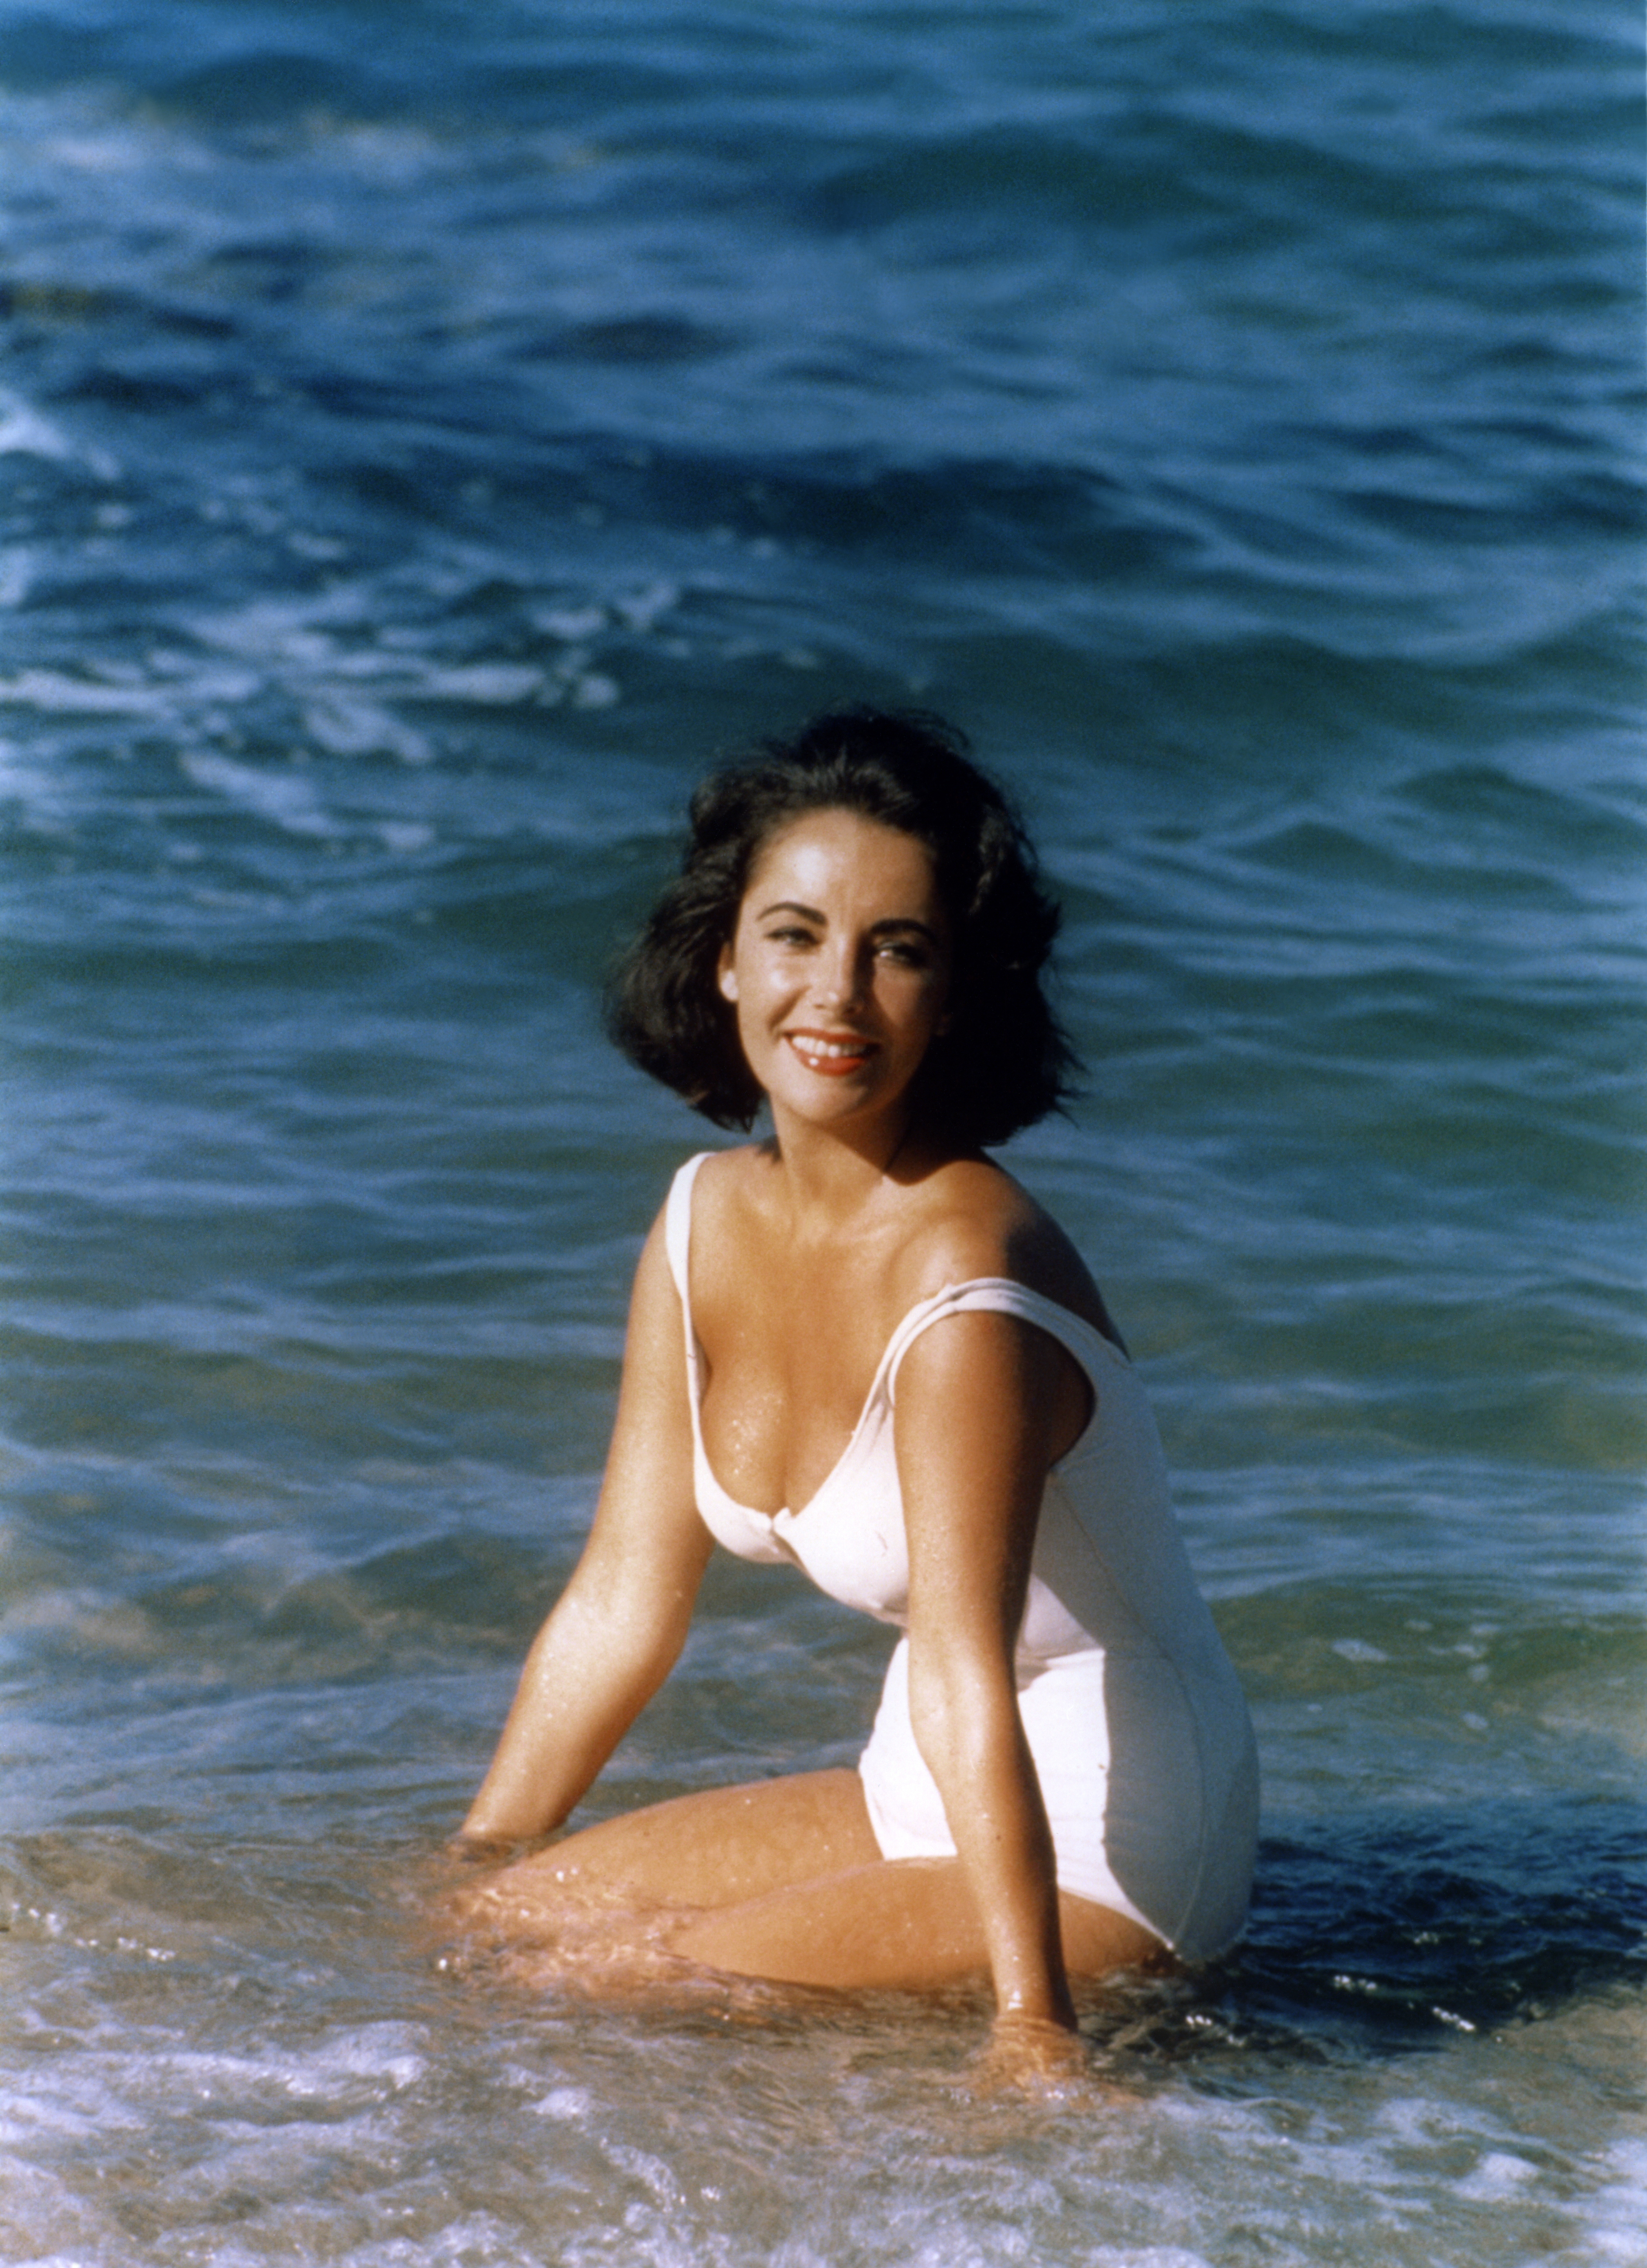 lizabeth Taylor on the set of "Suddenly Last Summer" in 1959 | Source: Getty Images